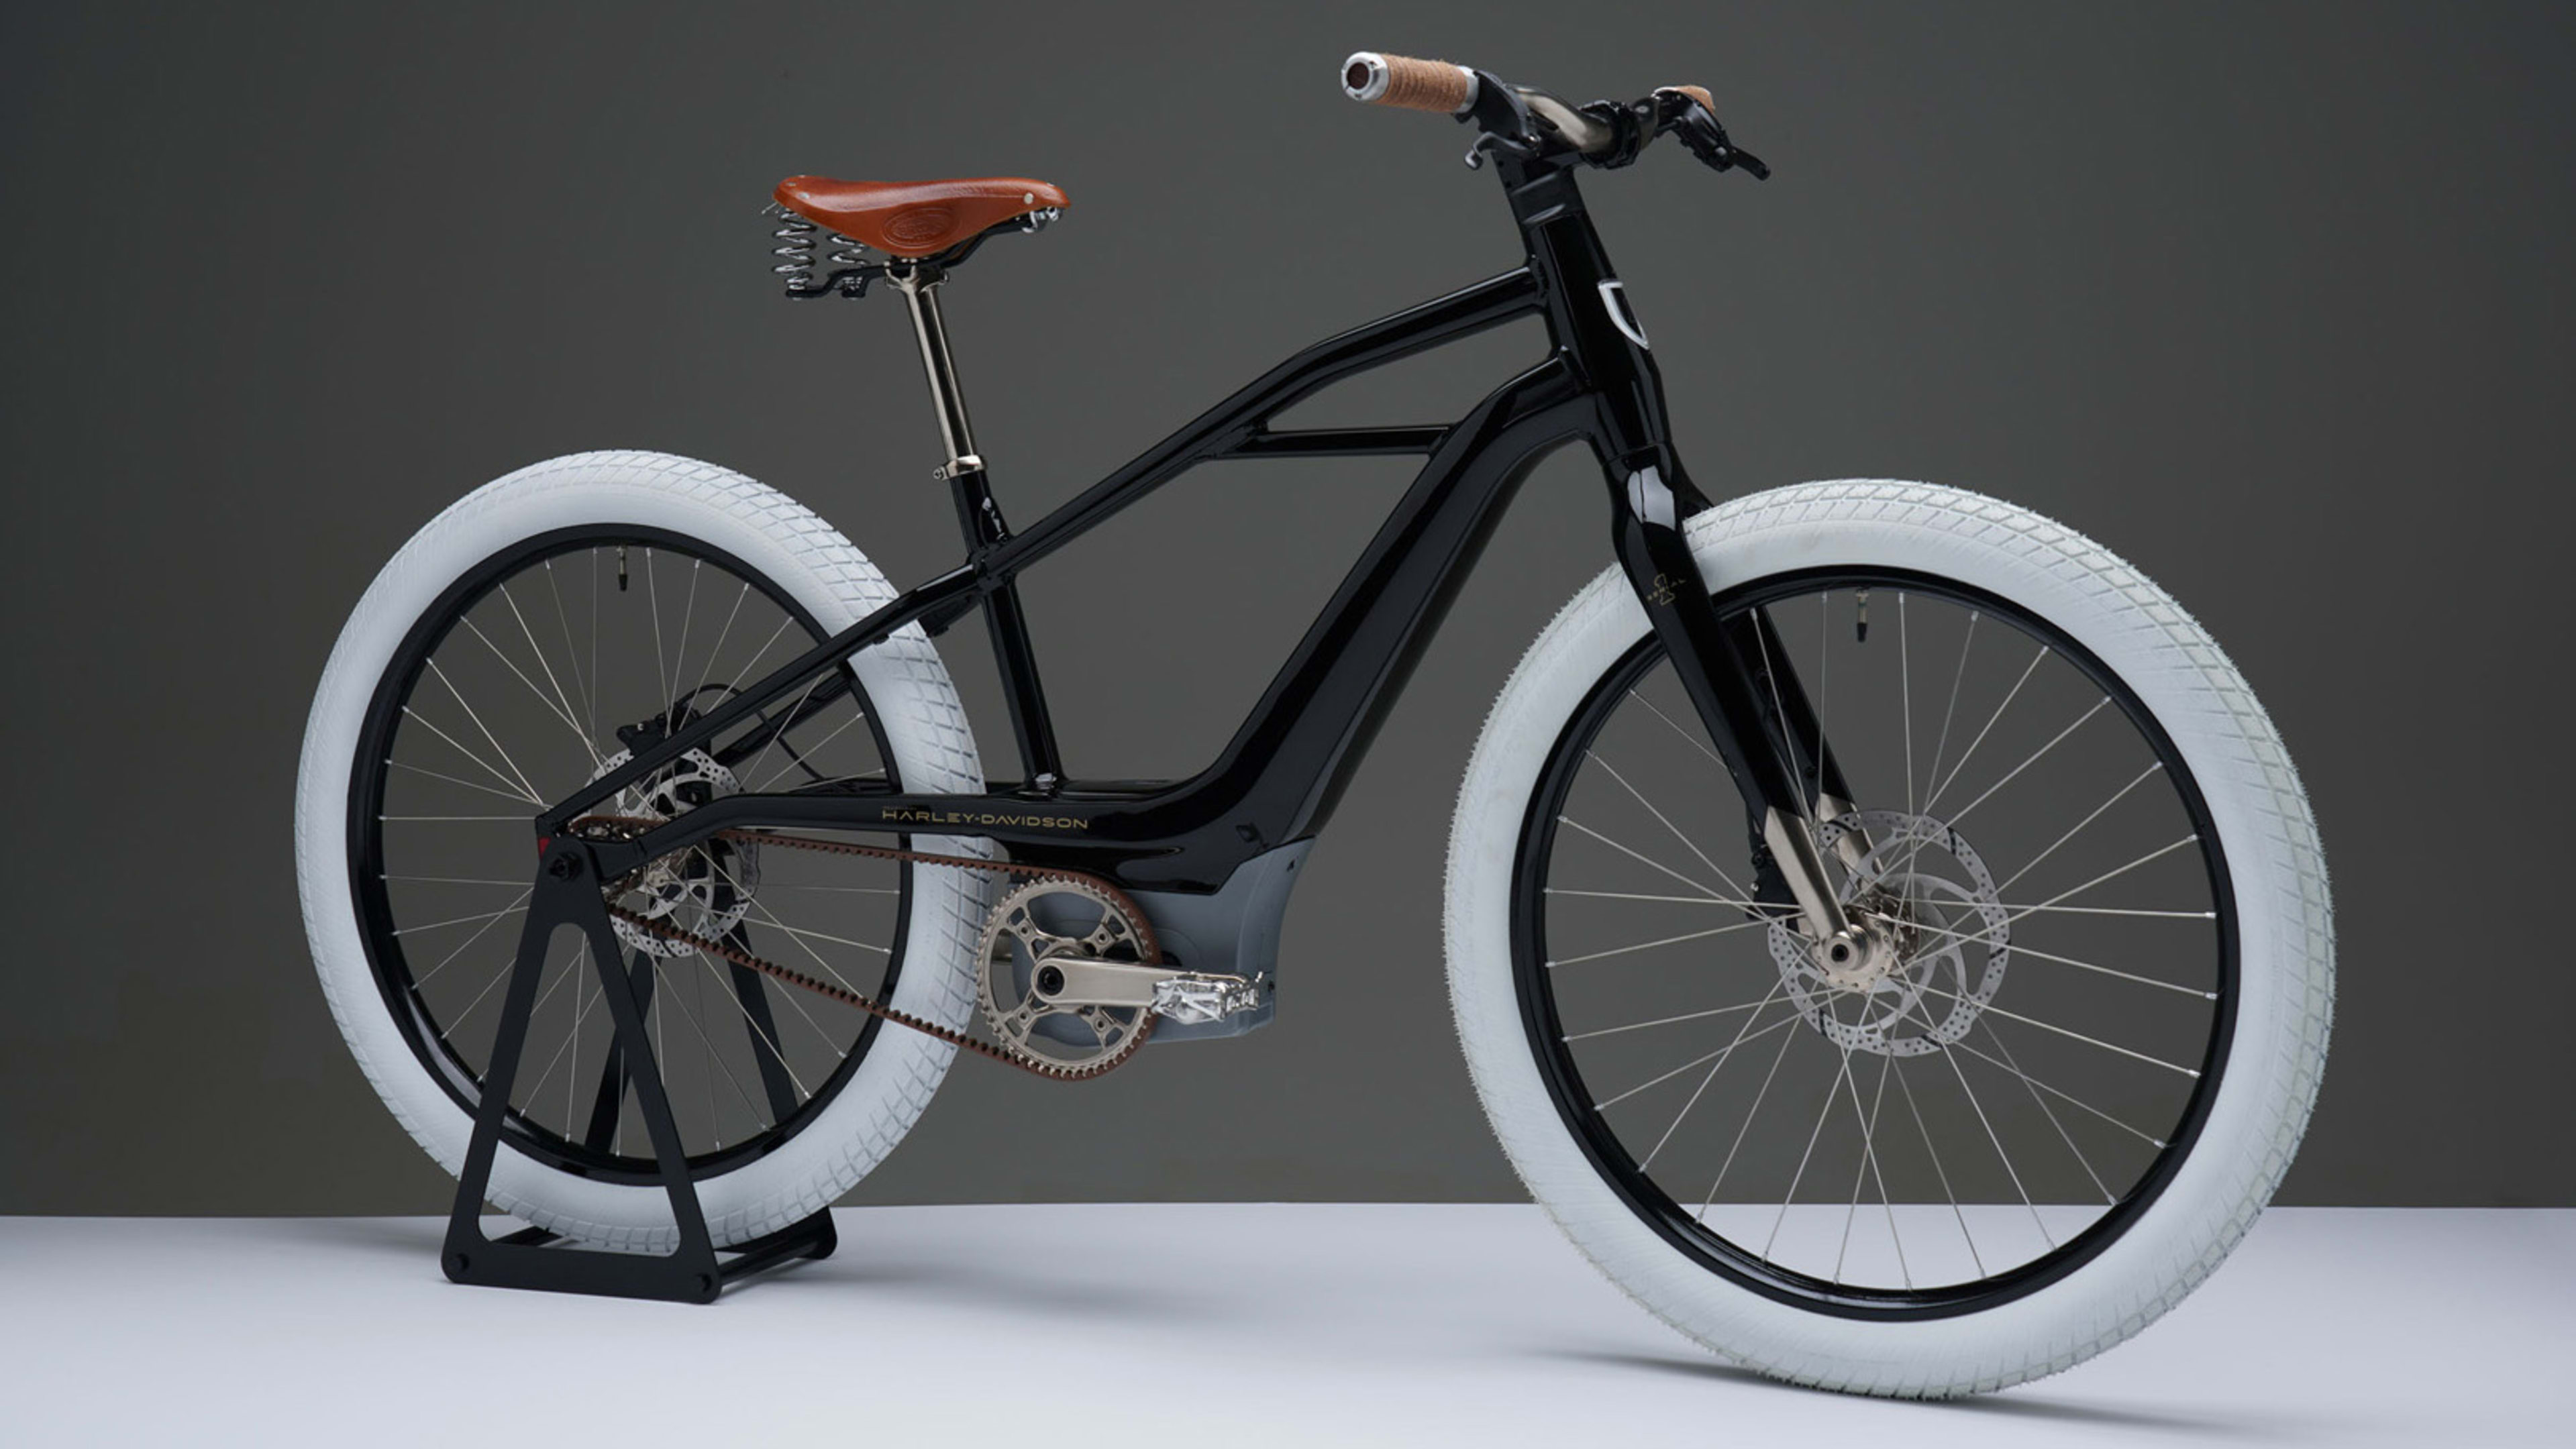 Harley-Davidson is making electric bikes now